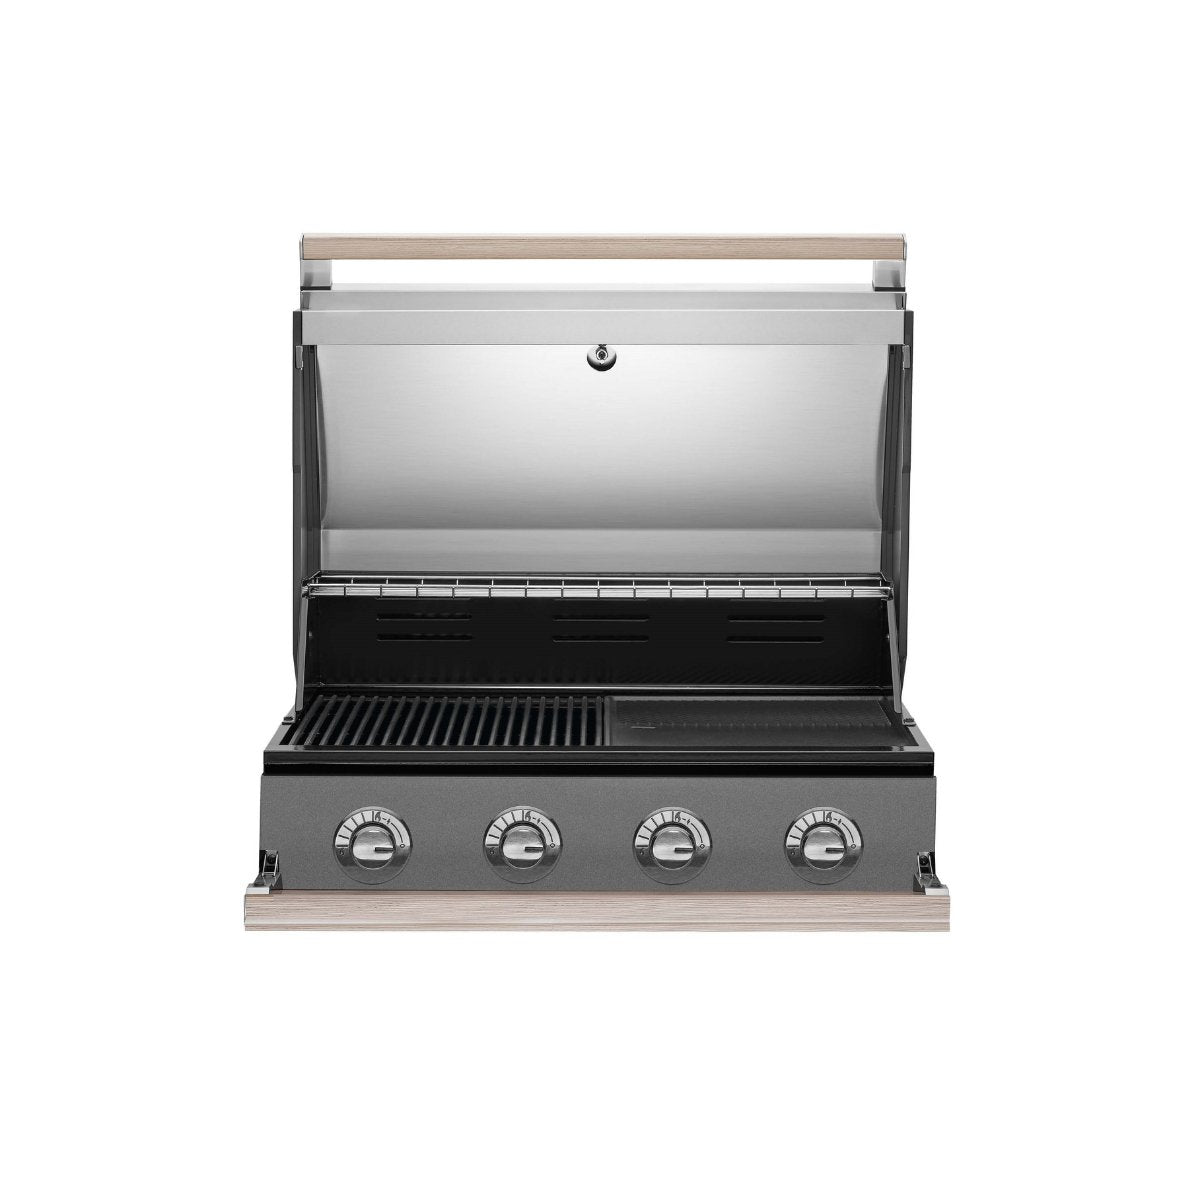 Beefeater 1500 4 Burner Built-In Grill - Kitchen In The Garden